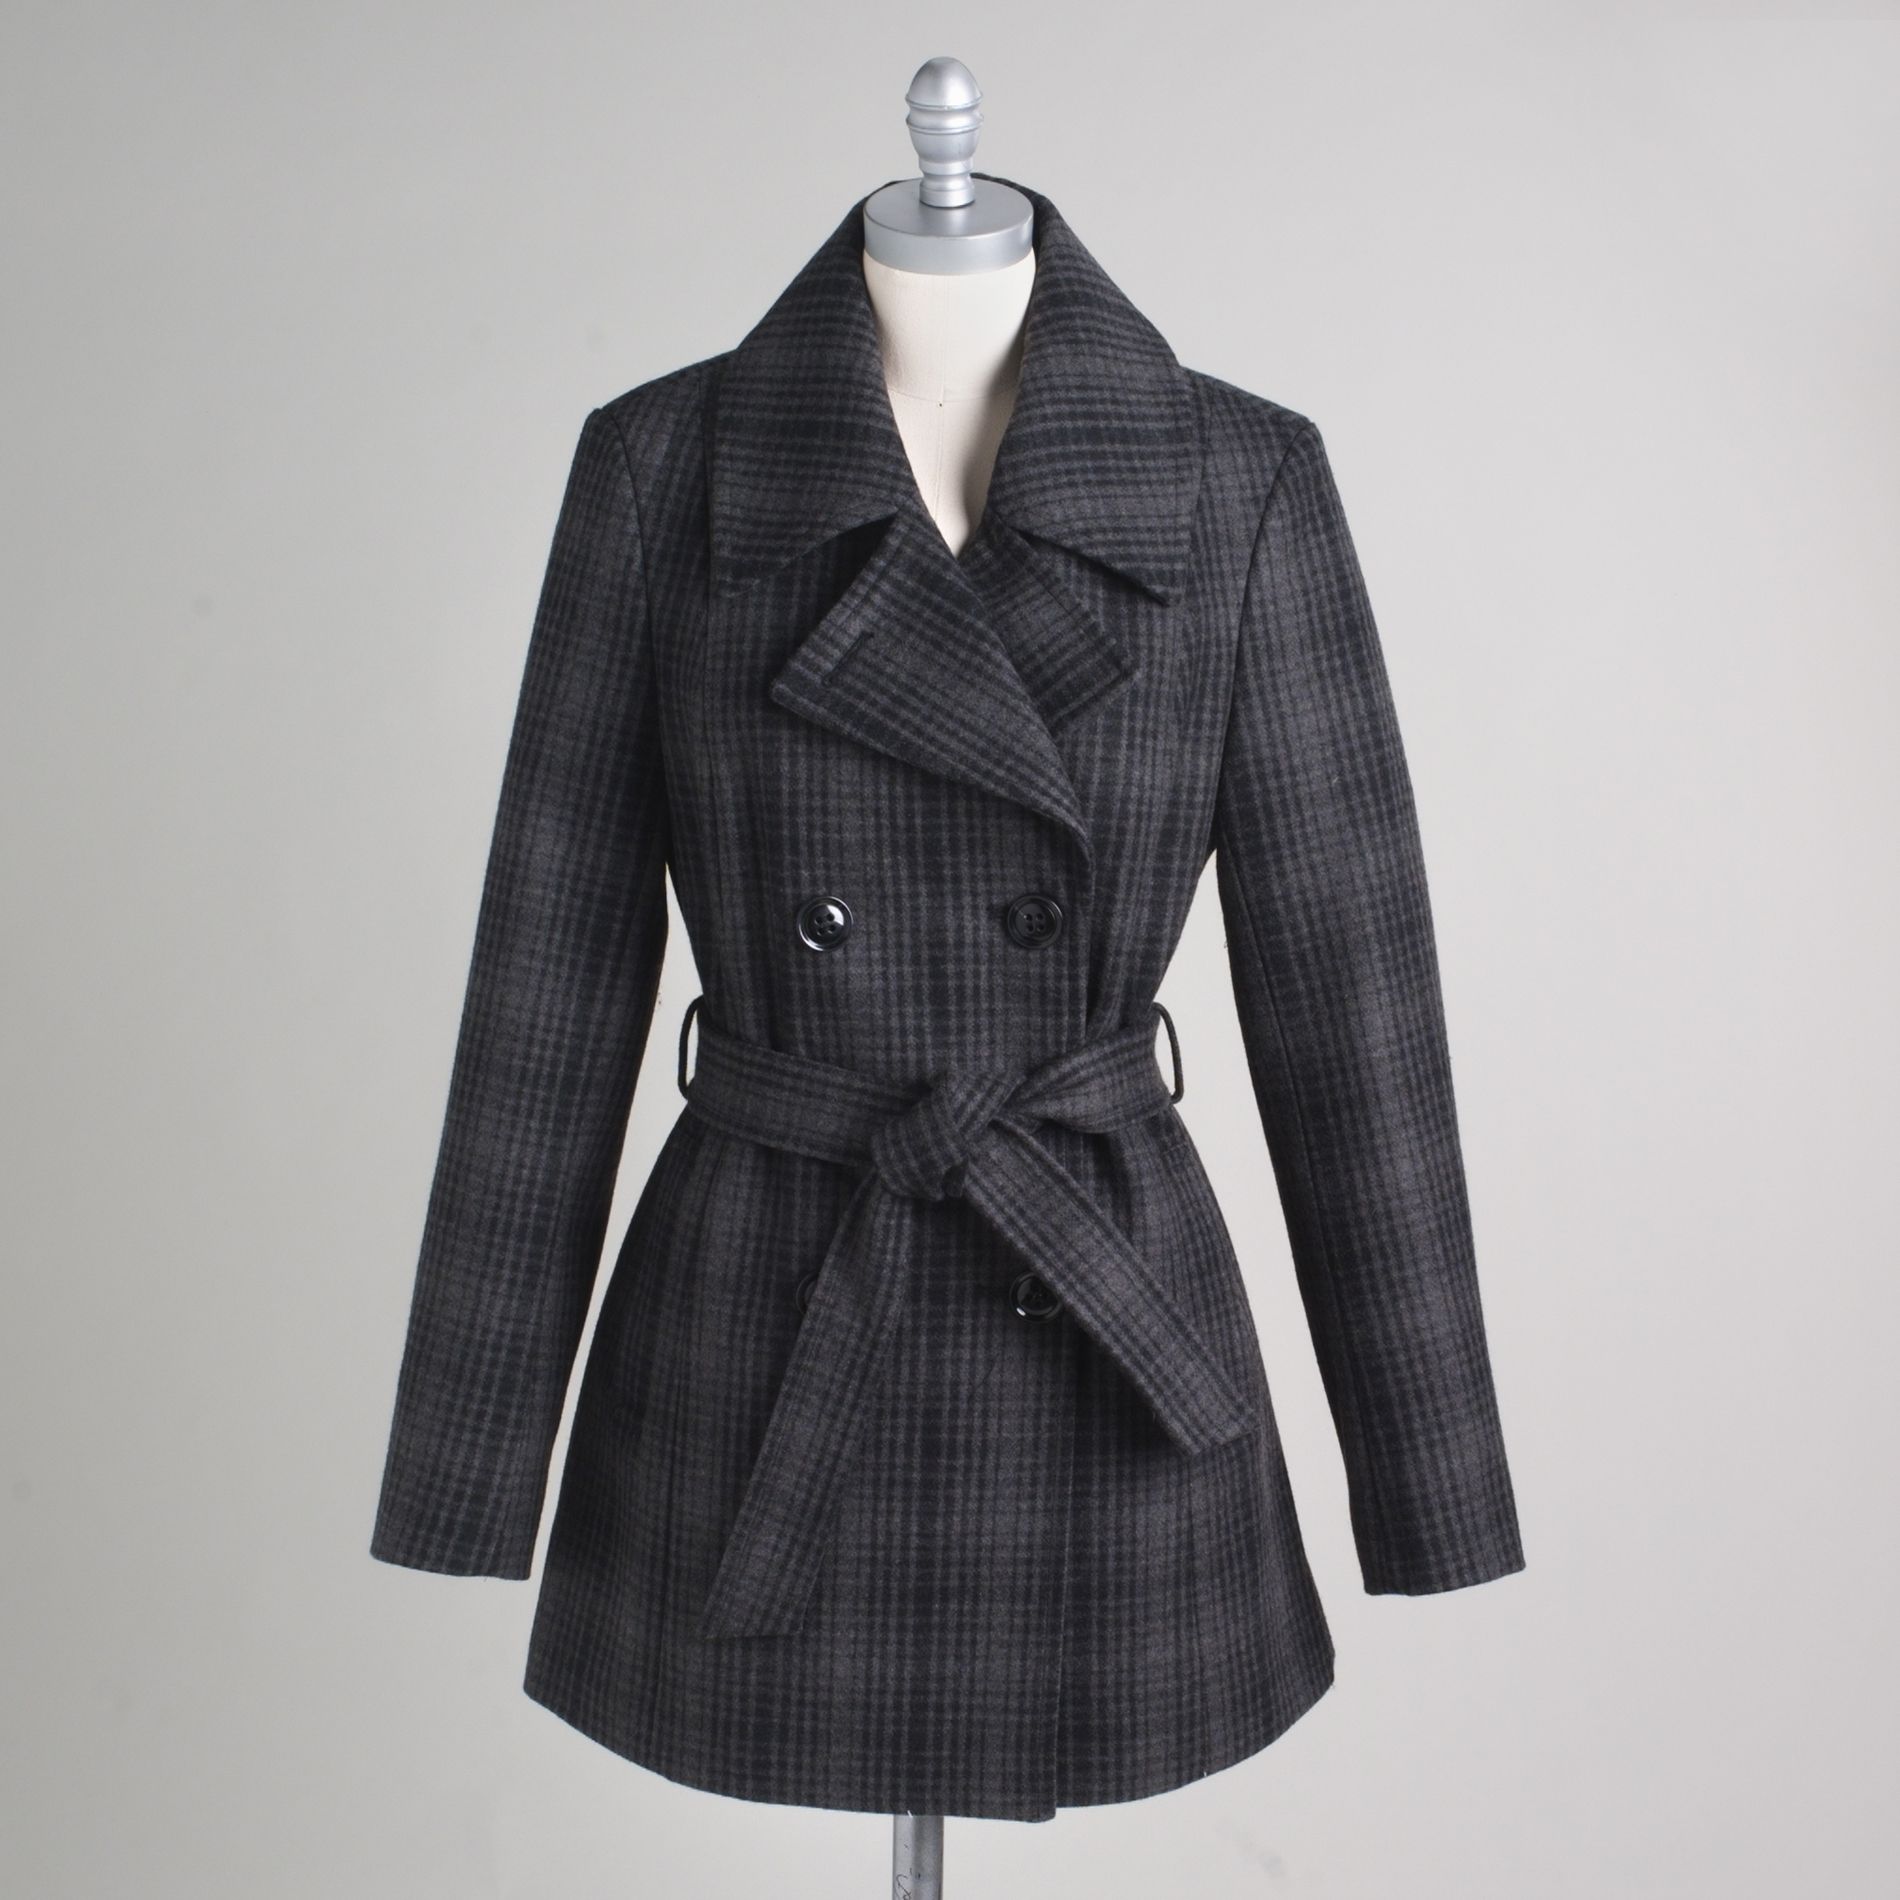 Metaphor Women's Double Breasted Belted Peacoat